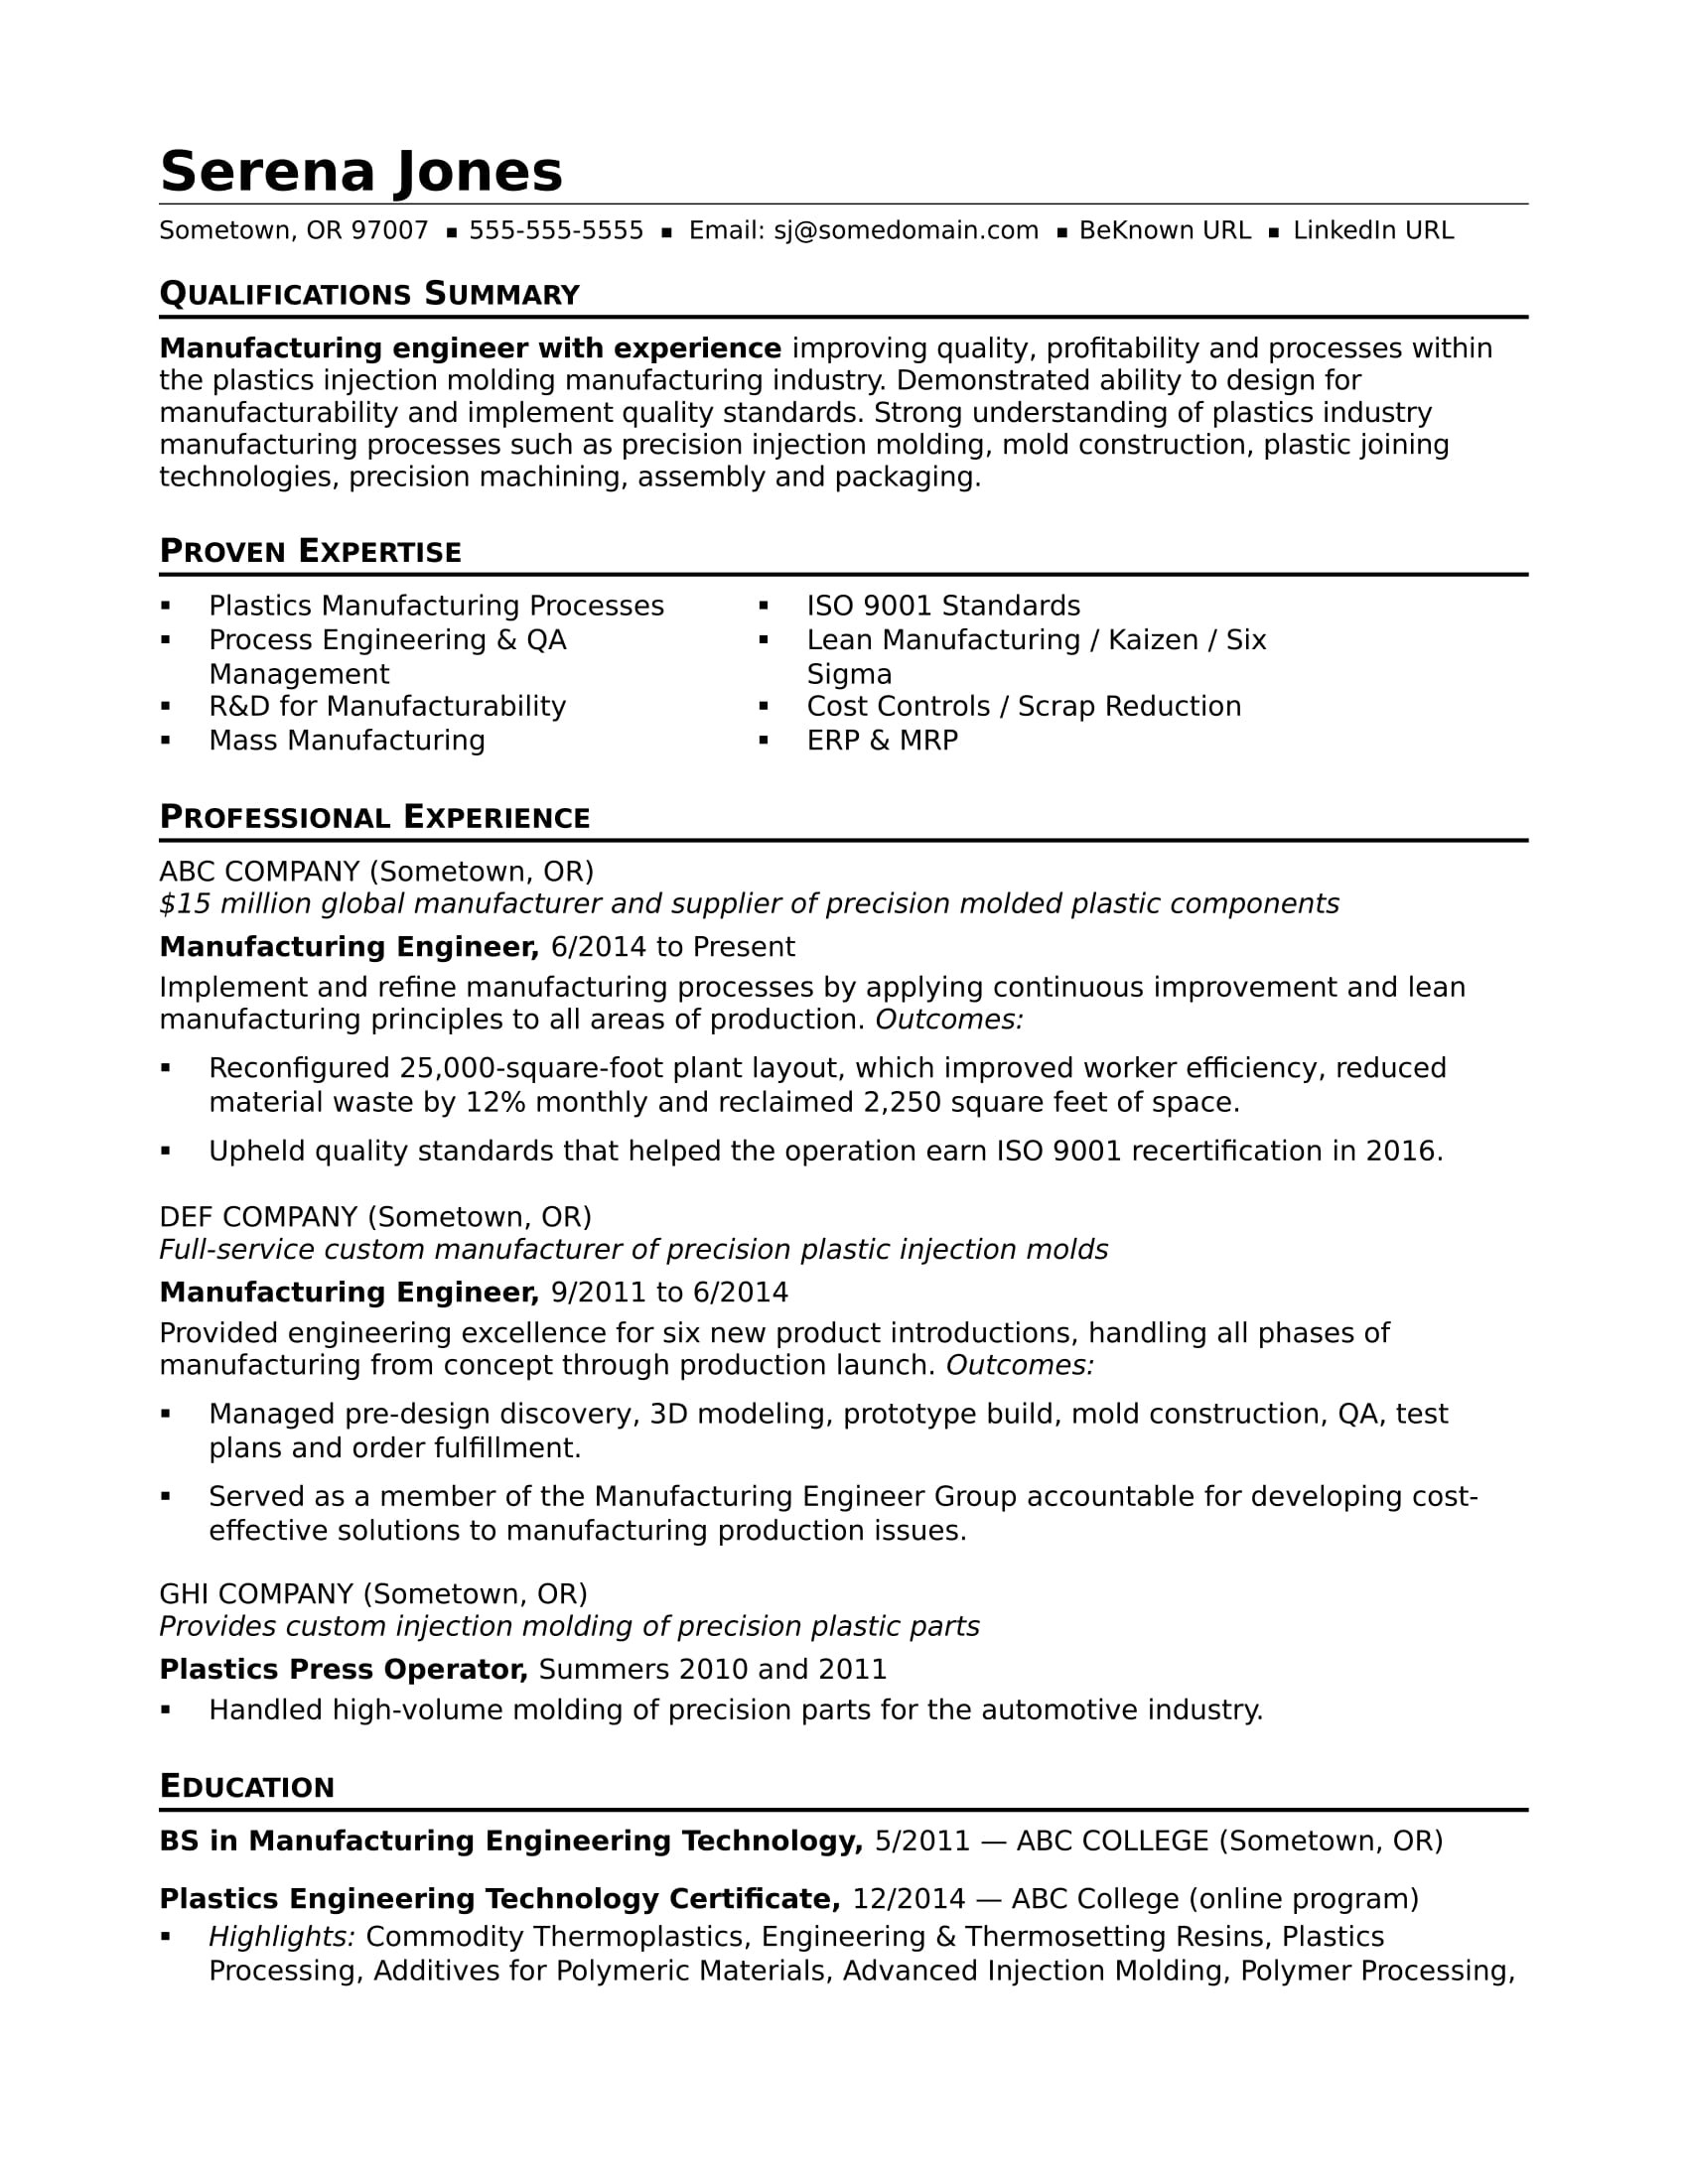 Sample Of A Good Production Resume Manufacturing Engineer Resume Sample Monster.com